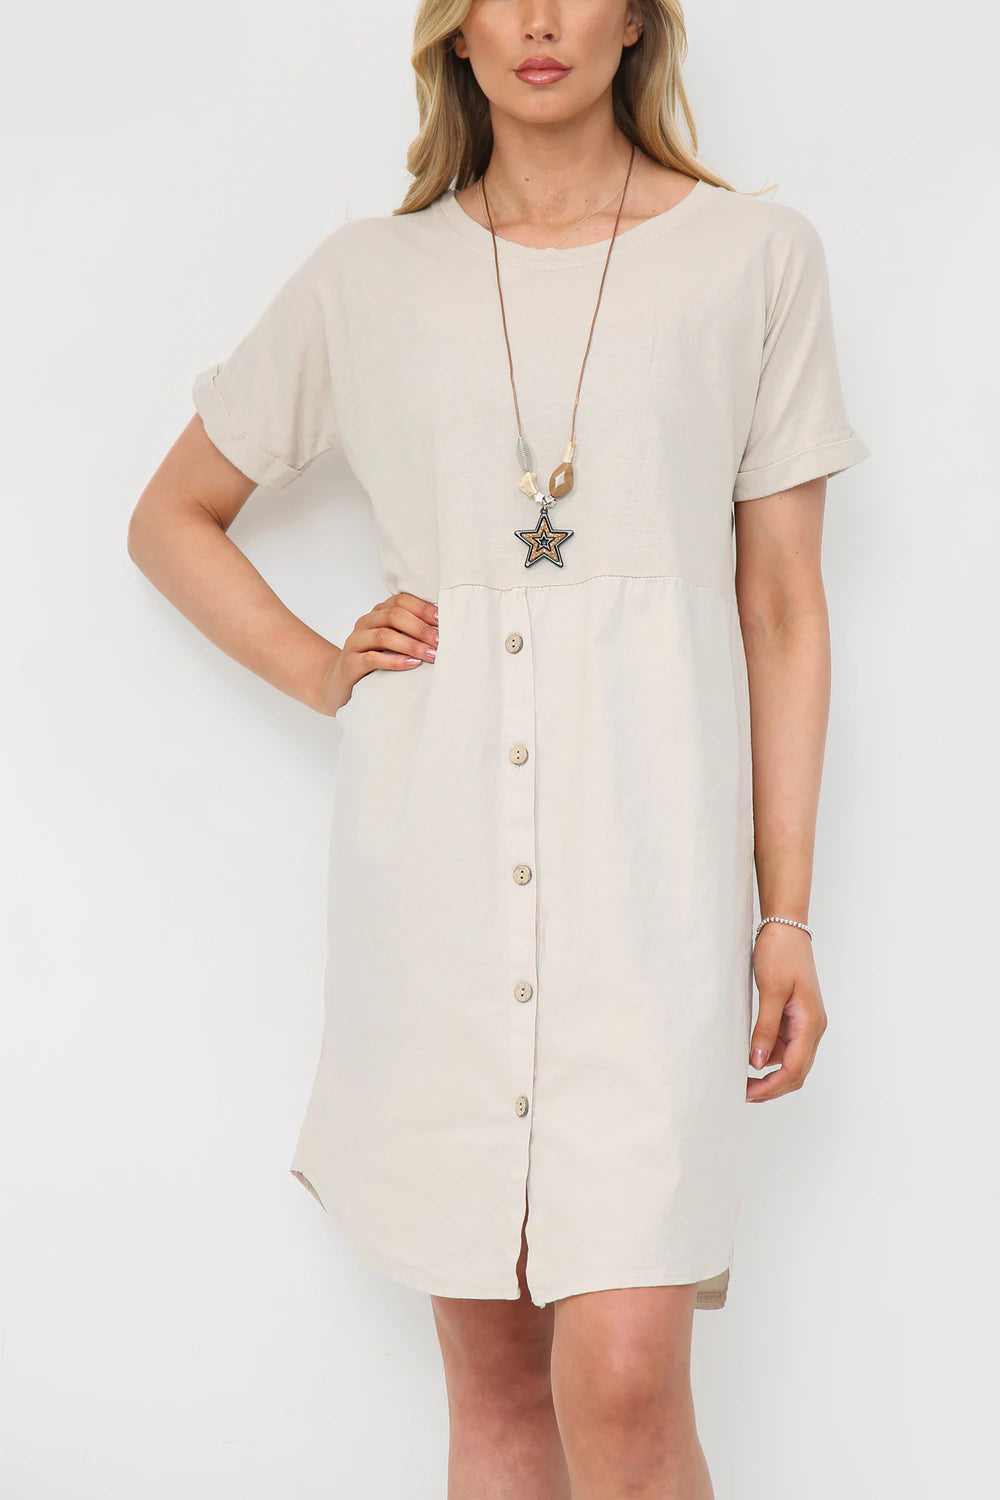 100% Cotton Button Dress With Necklace